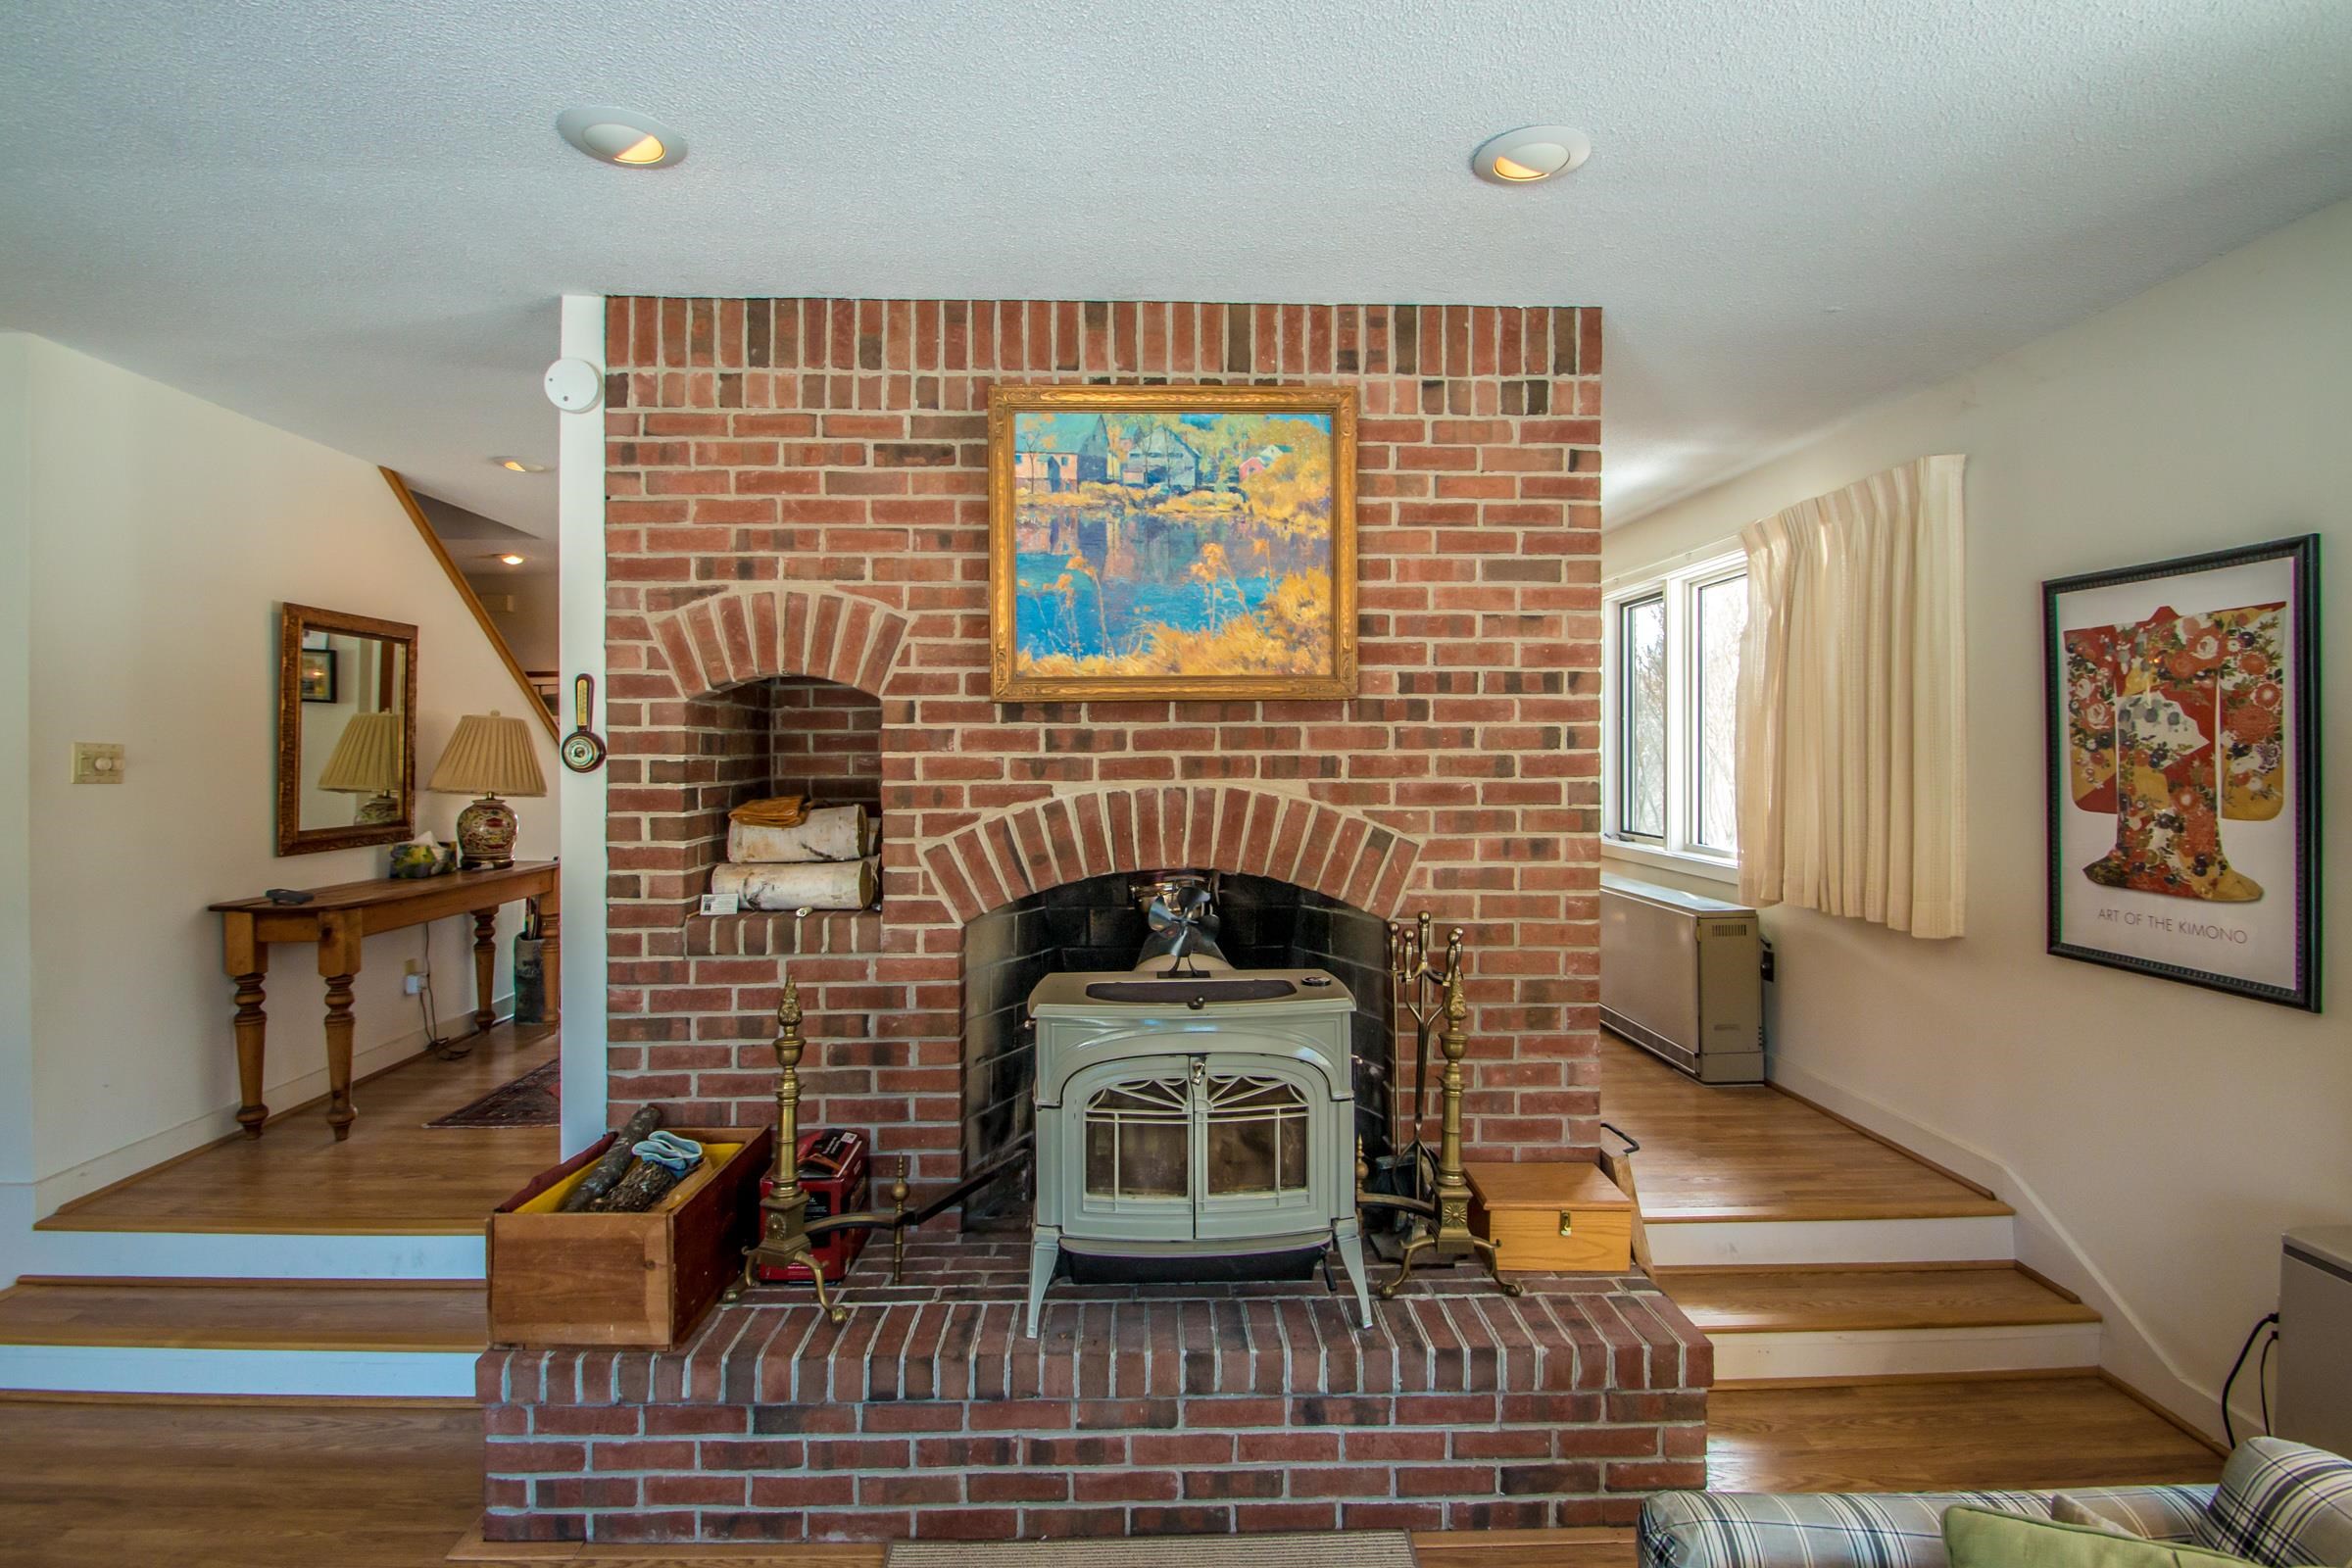 If you prefer the look of a fireplace, the wood stove can be removed.